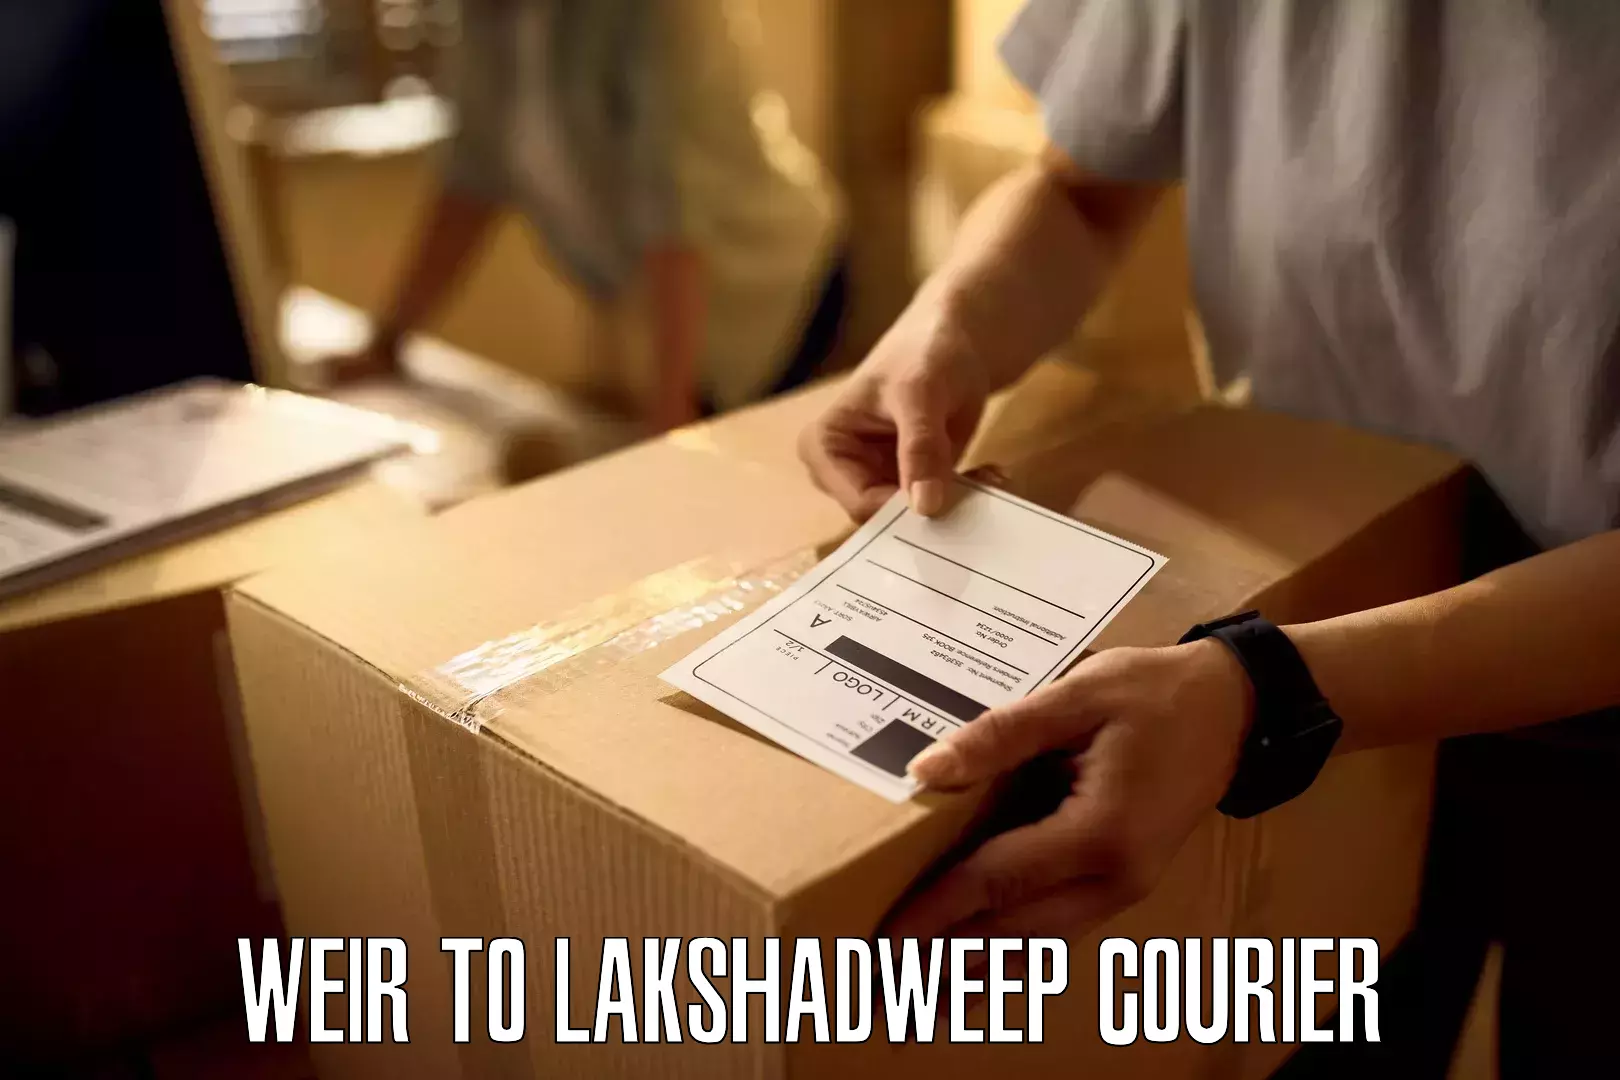 Cost-effective courier options Weir to Lakshadweep